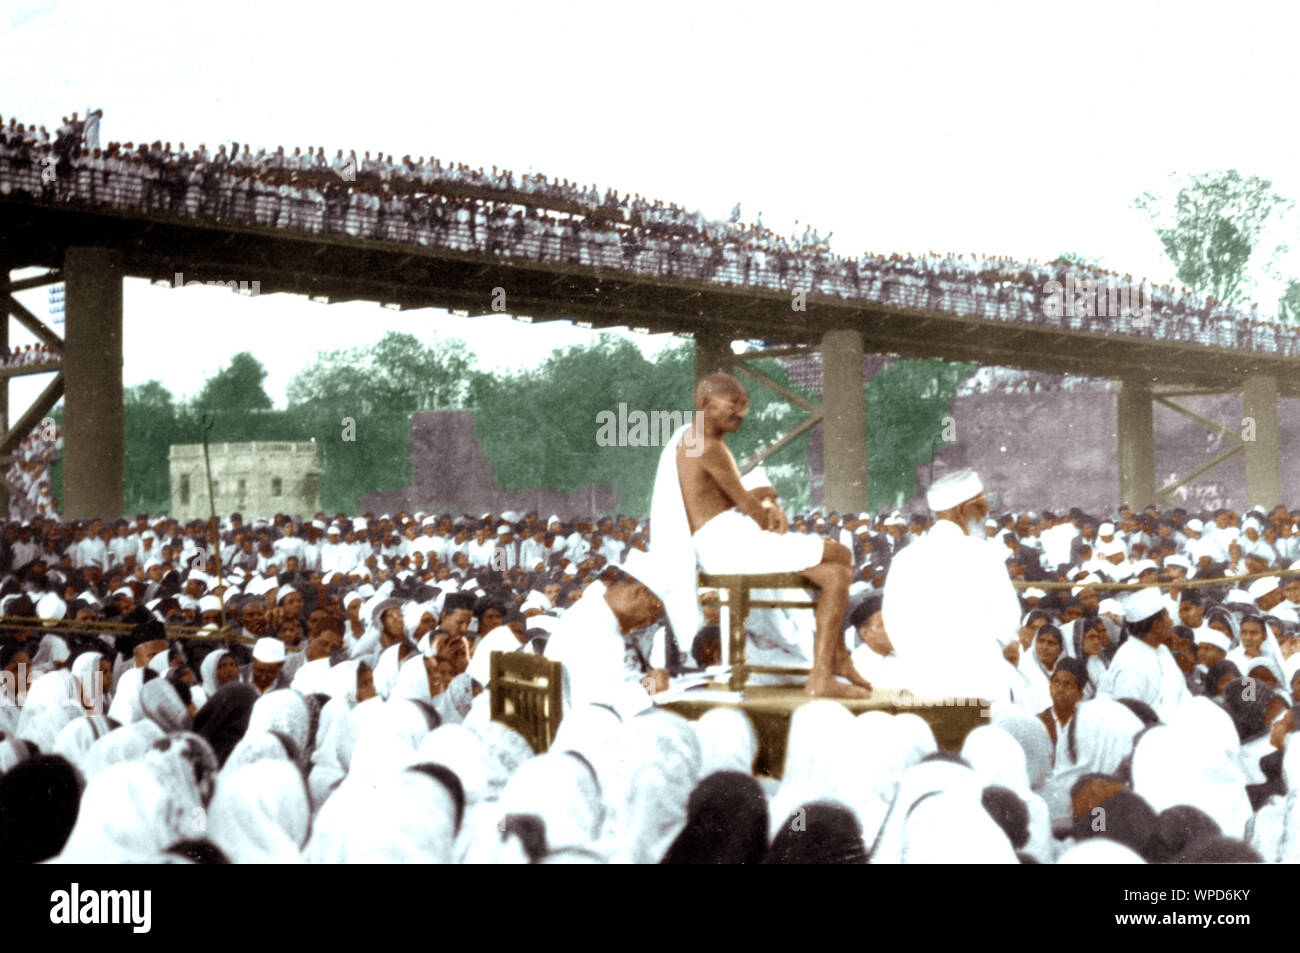 Mahatma Gandhi delivering speech in the dry river bed, Gujarat, India, Asia, March 11, 1930 Stock Photo